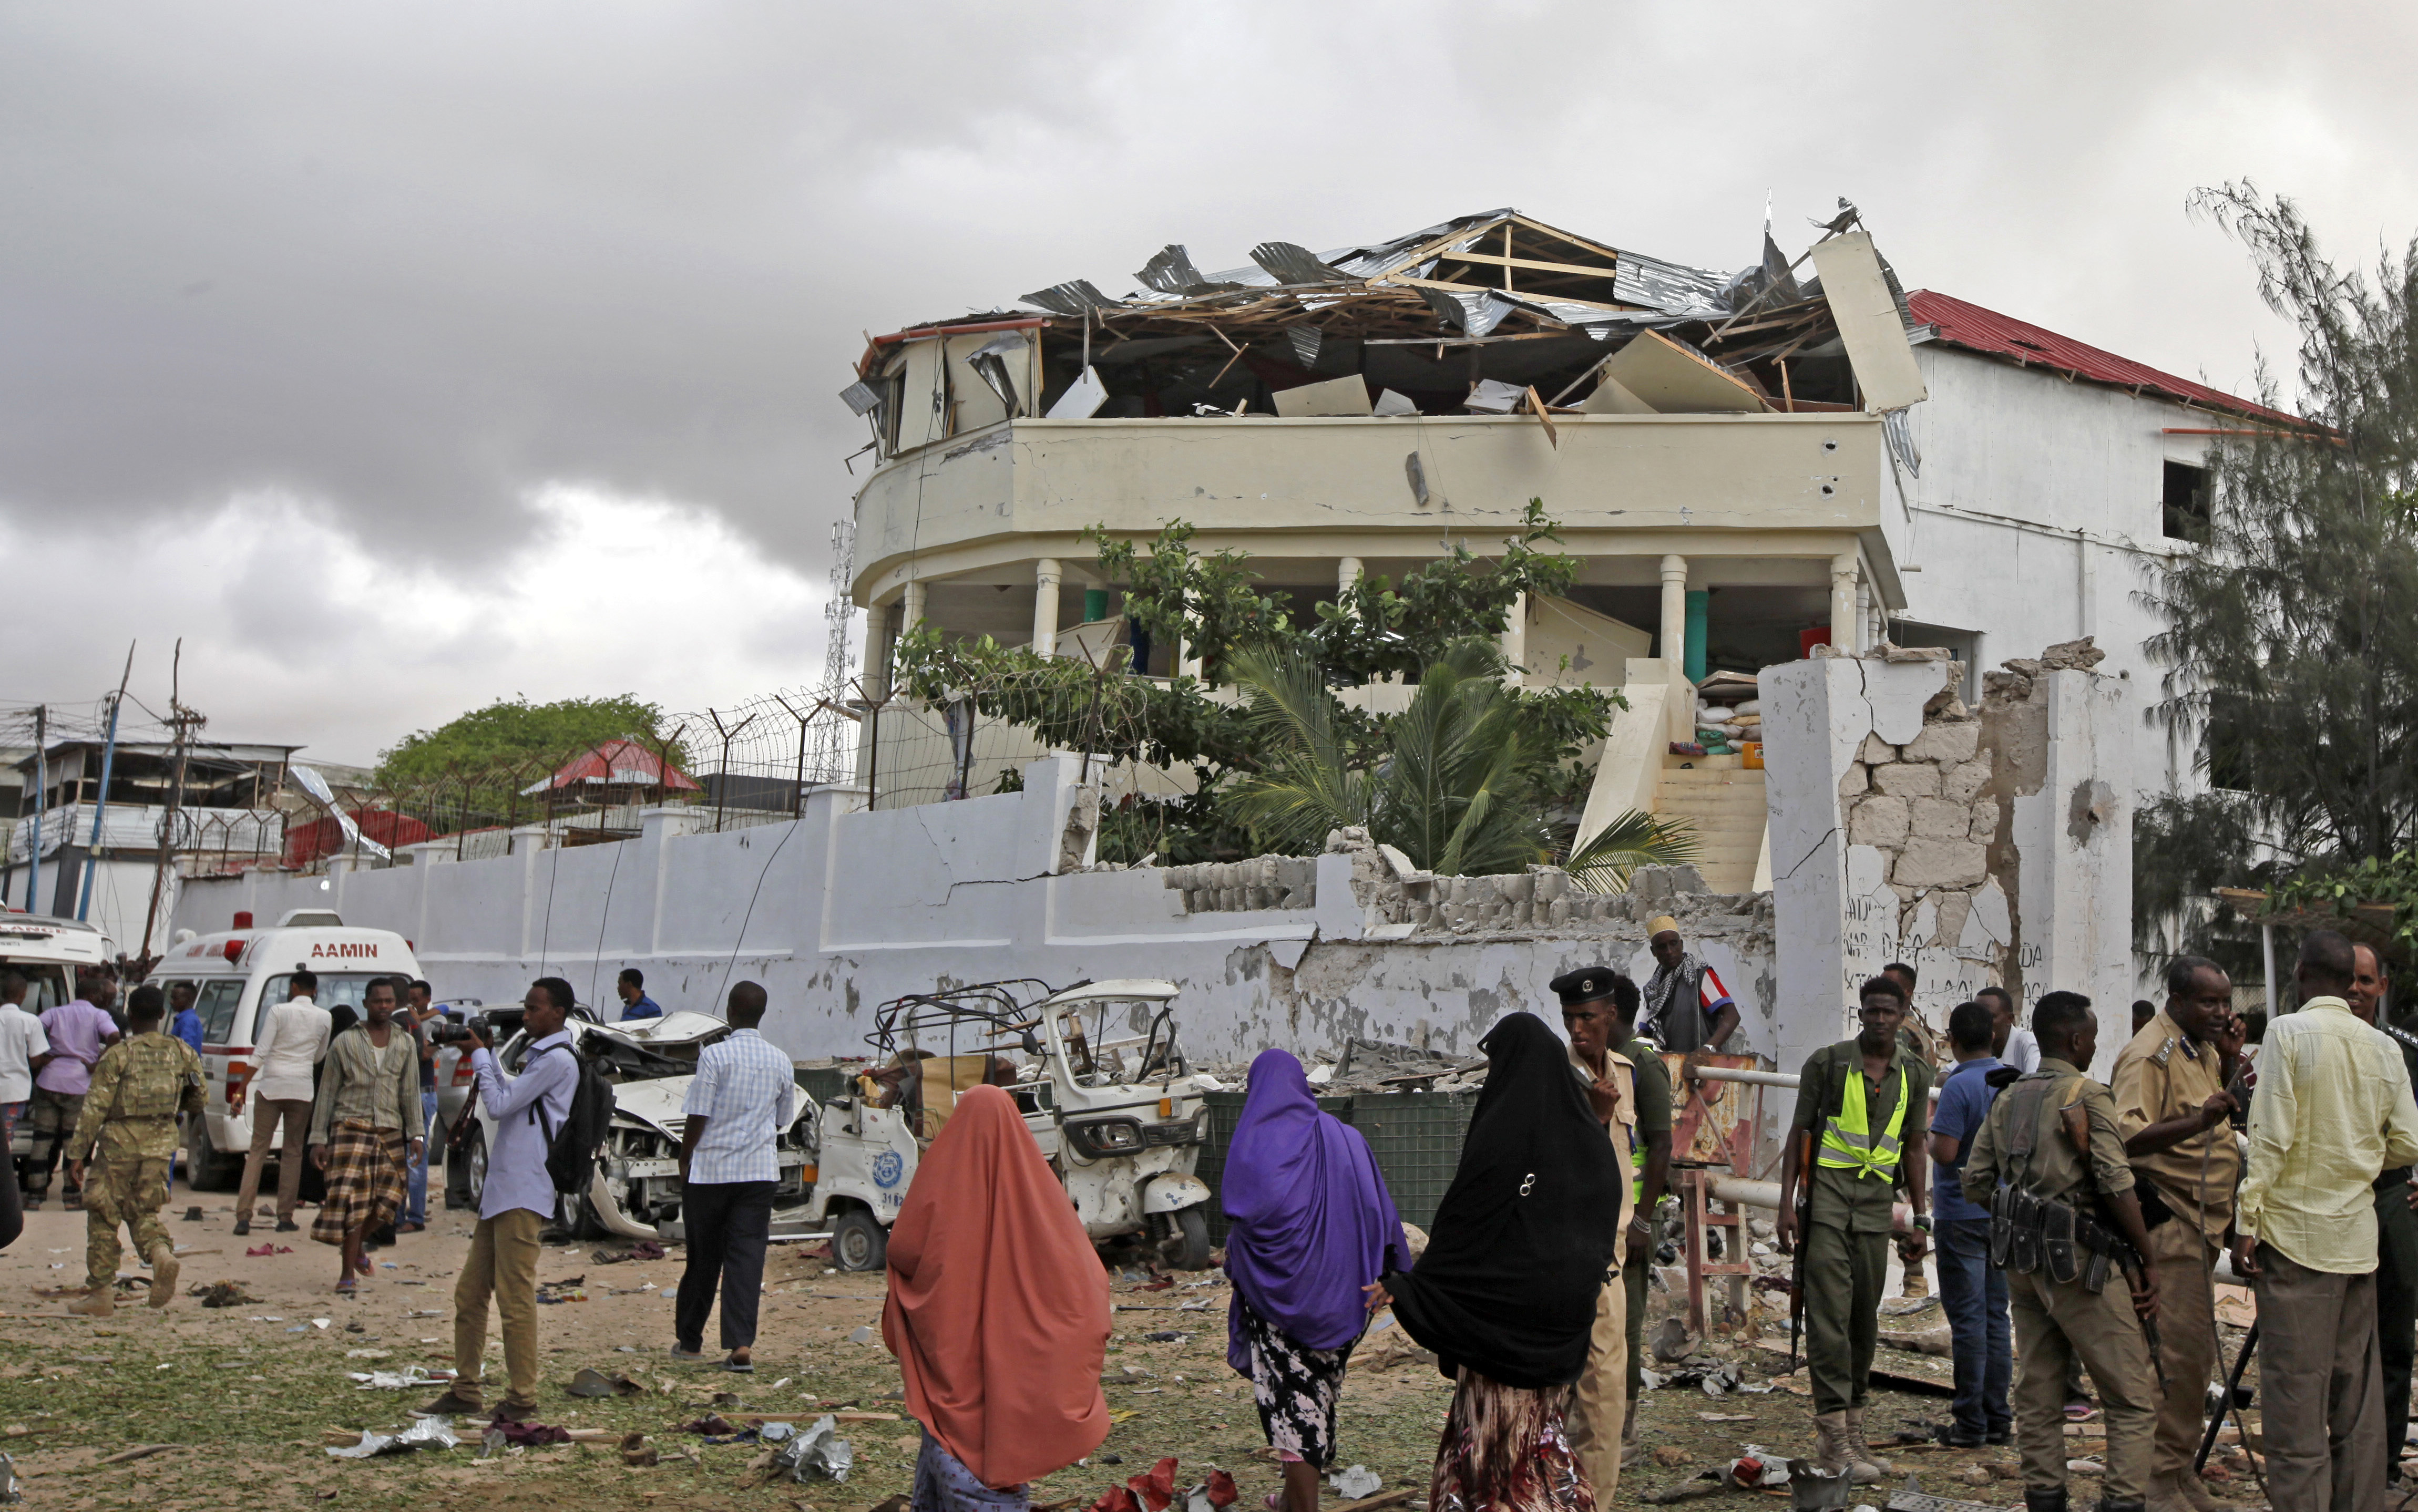 Somalis gather outside a destroyed building near a restaurant that was the scene of a car bomb blast and gun battle in Mogadishu, Somalia Thursday, June 15, 2017. Somali survivors early Thursday described harrowing scenes of the night-long siege of a popular Mogadishu restaurant by al-Shabab Islamic extremists that was ended by security forces. (AP Photo/Farah Abdi Warsameh)